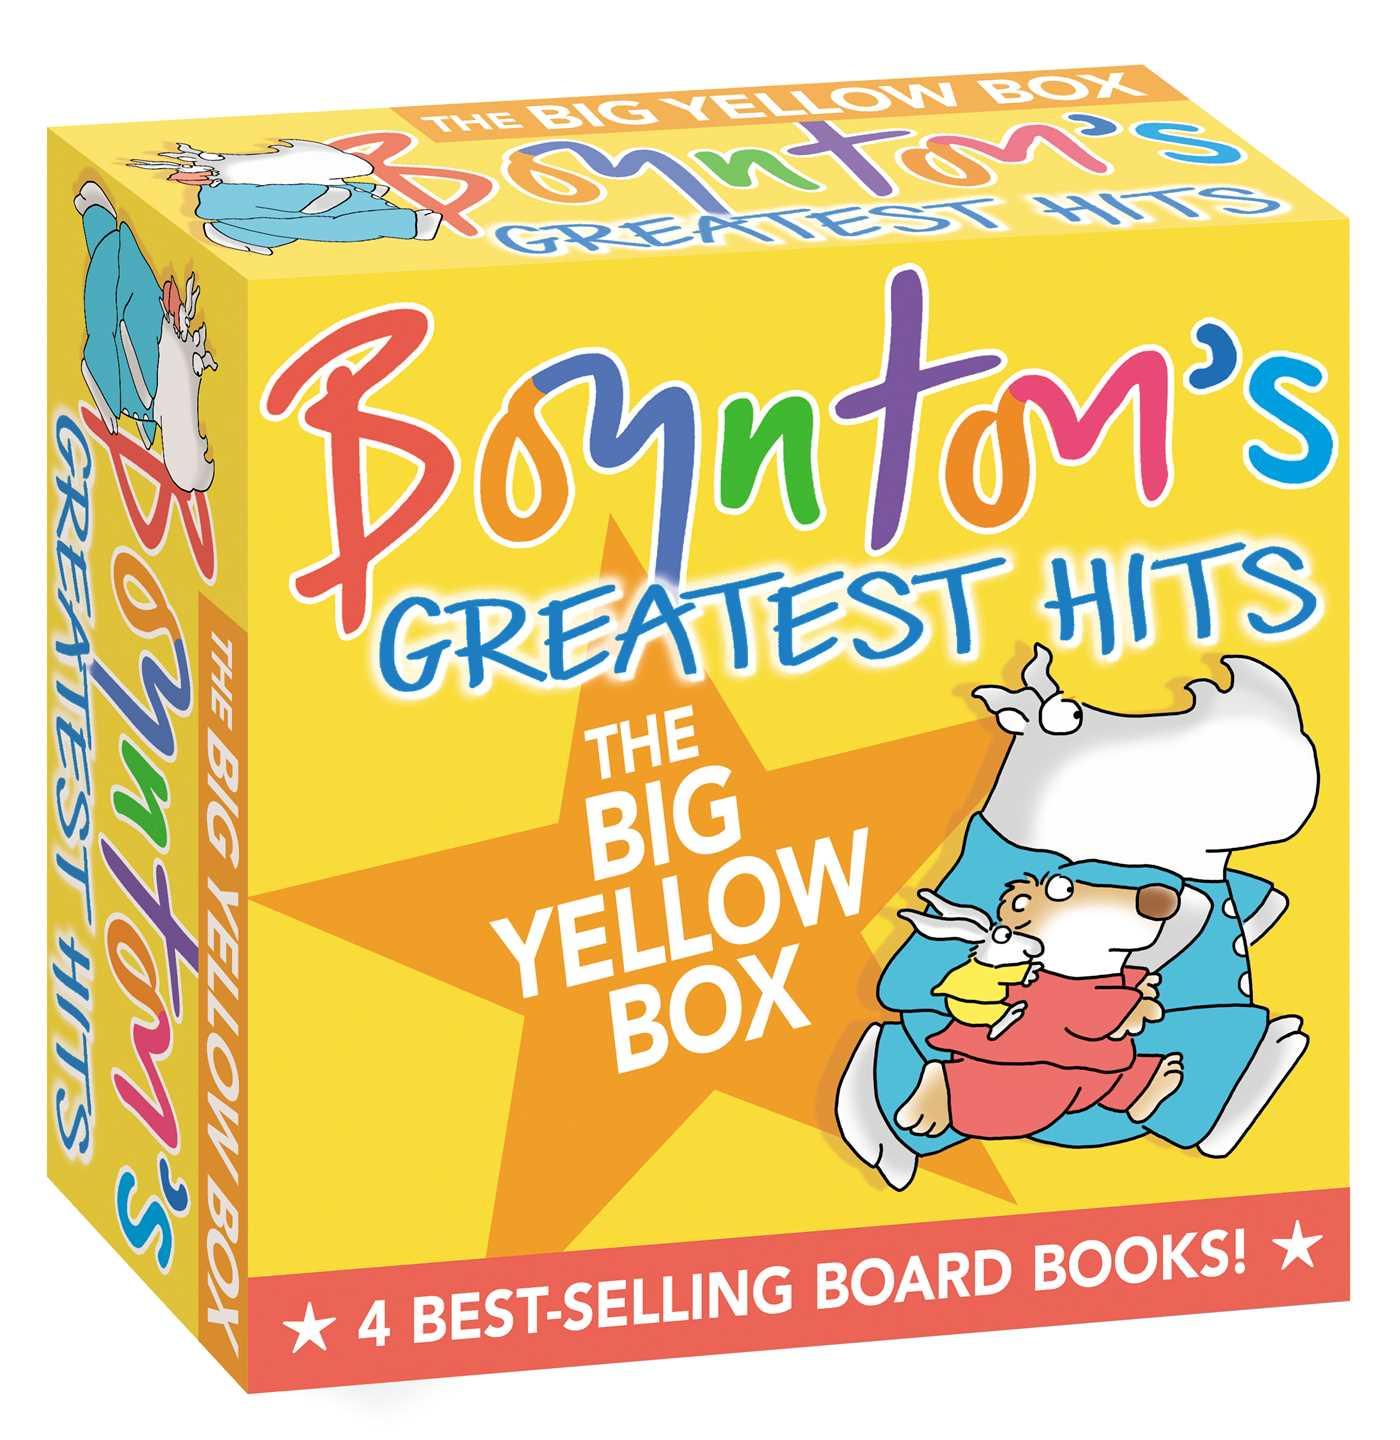 Boynton s Greatest Hits the Big Yellow Box: The Going to Bed Book; Horns to Toes; Opposites; But Not the Hippopotamus - Boynton, Sandra